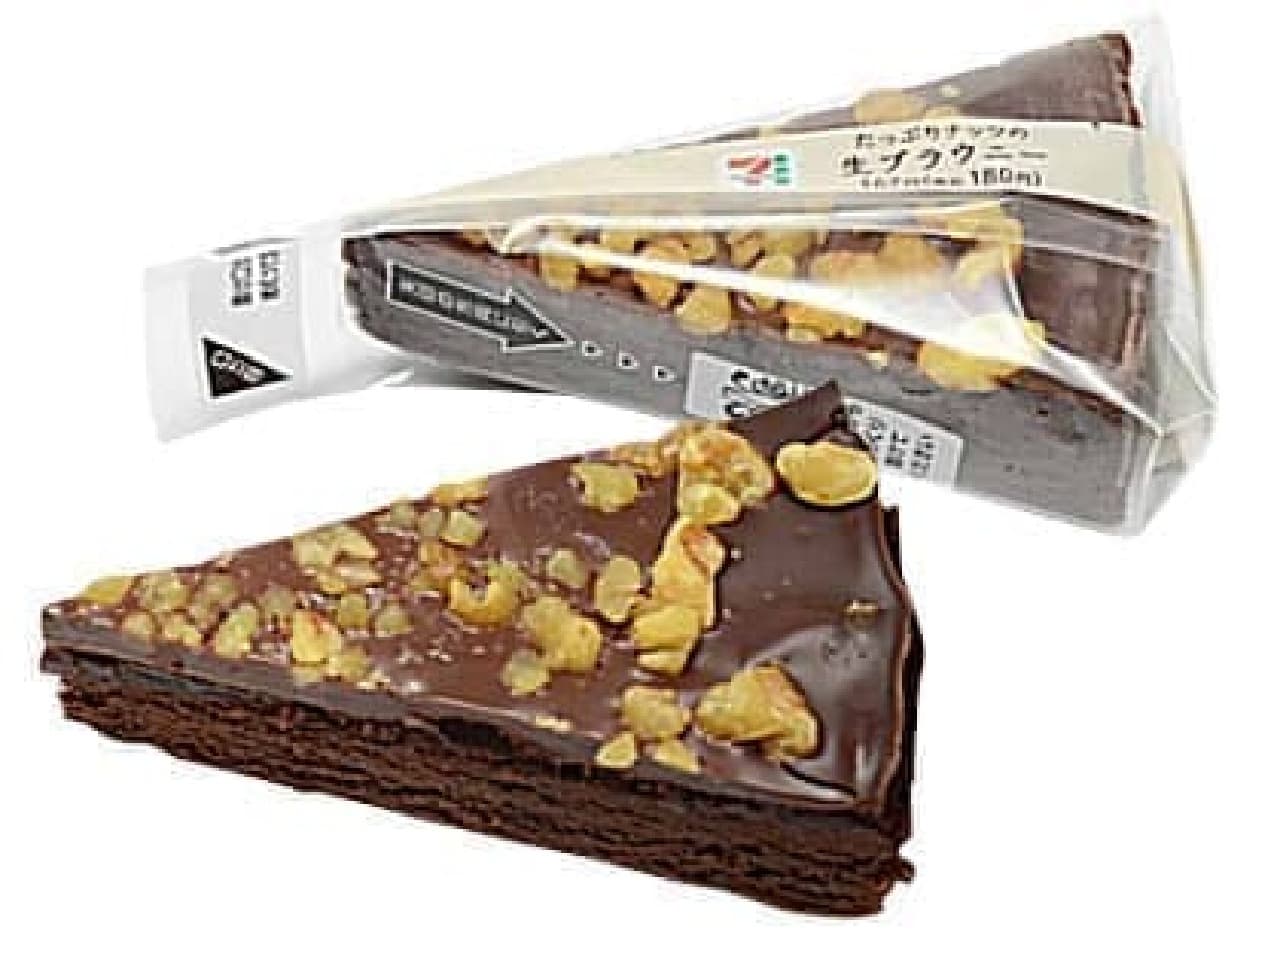 7-ELEVEN raw brownies